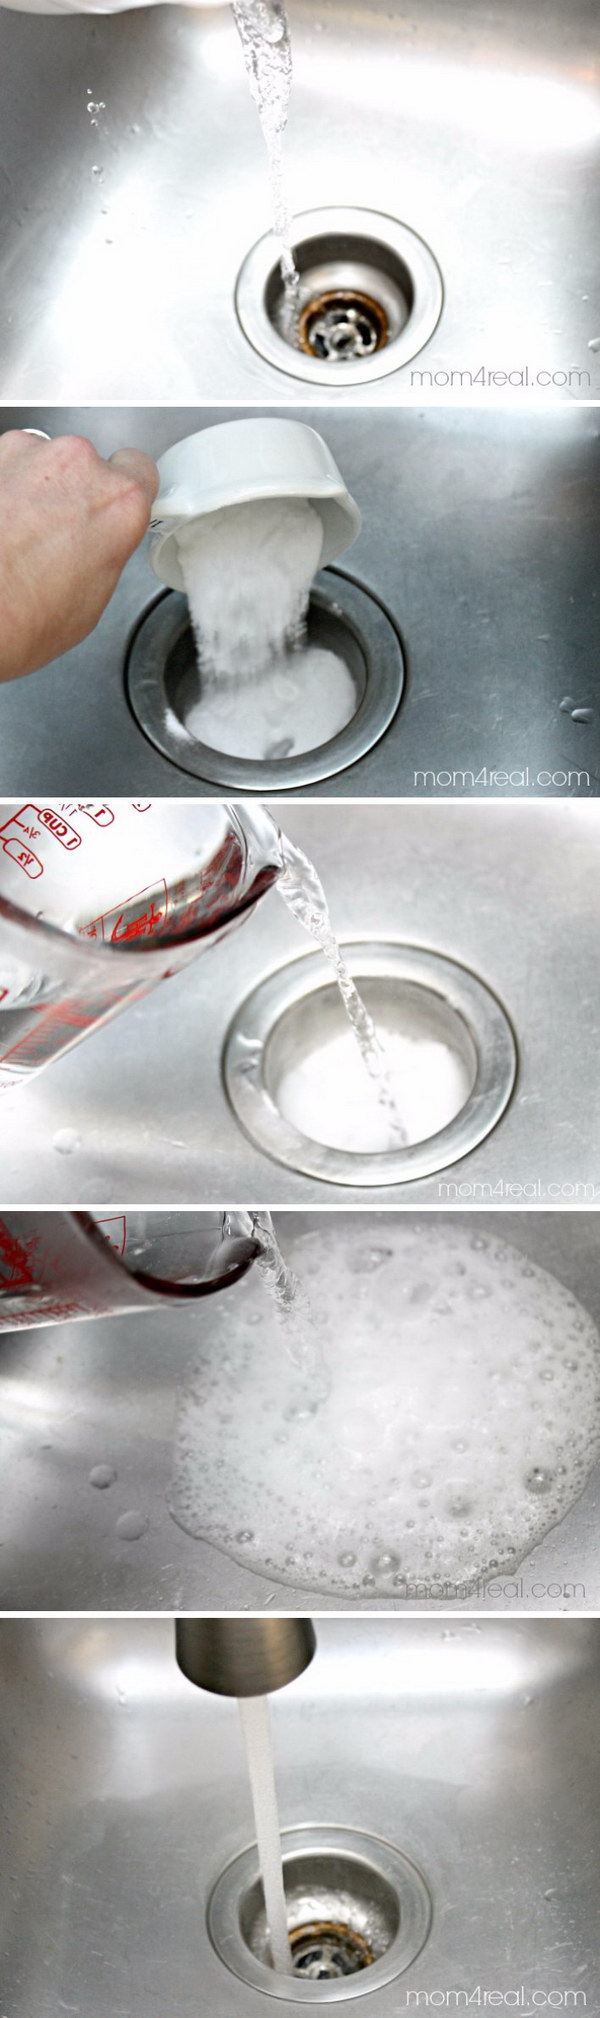 Natural drain cleaning trick with baking soda and vinegar. 